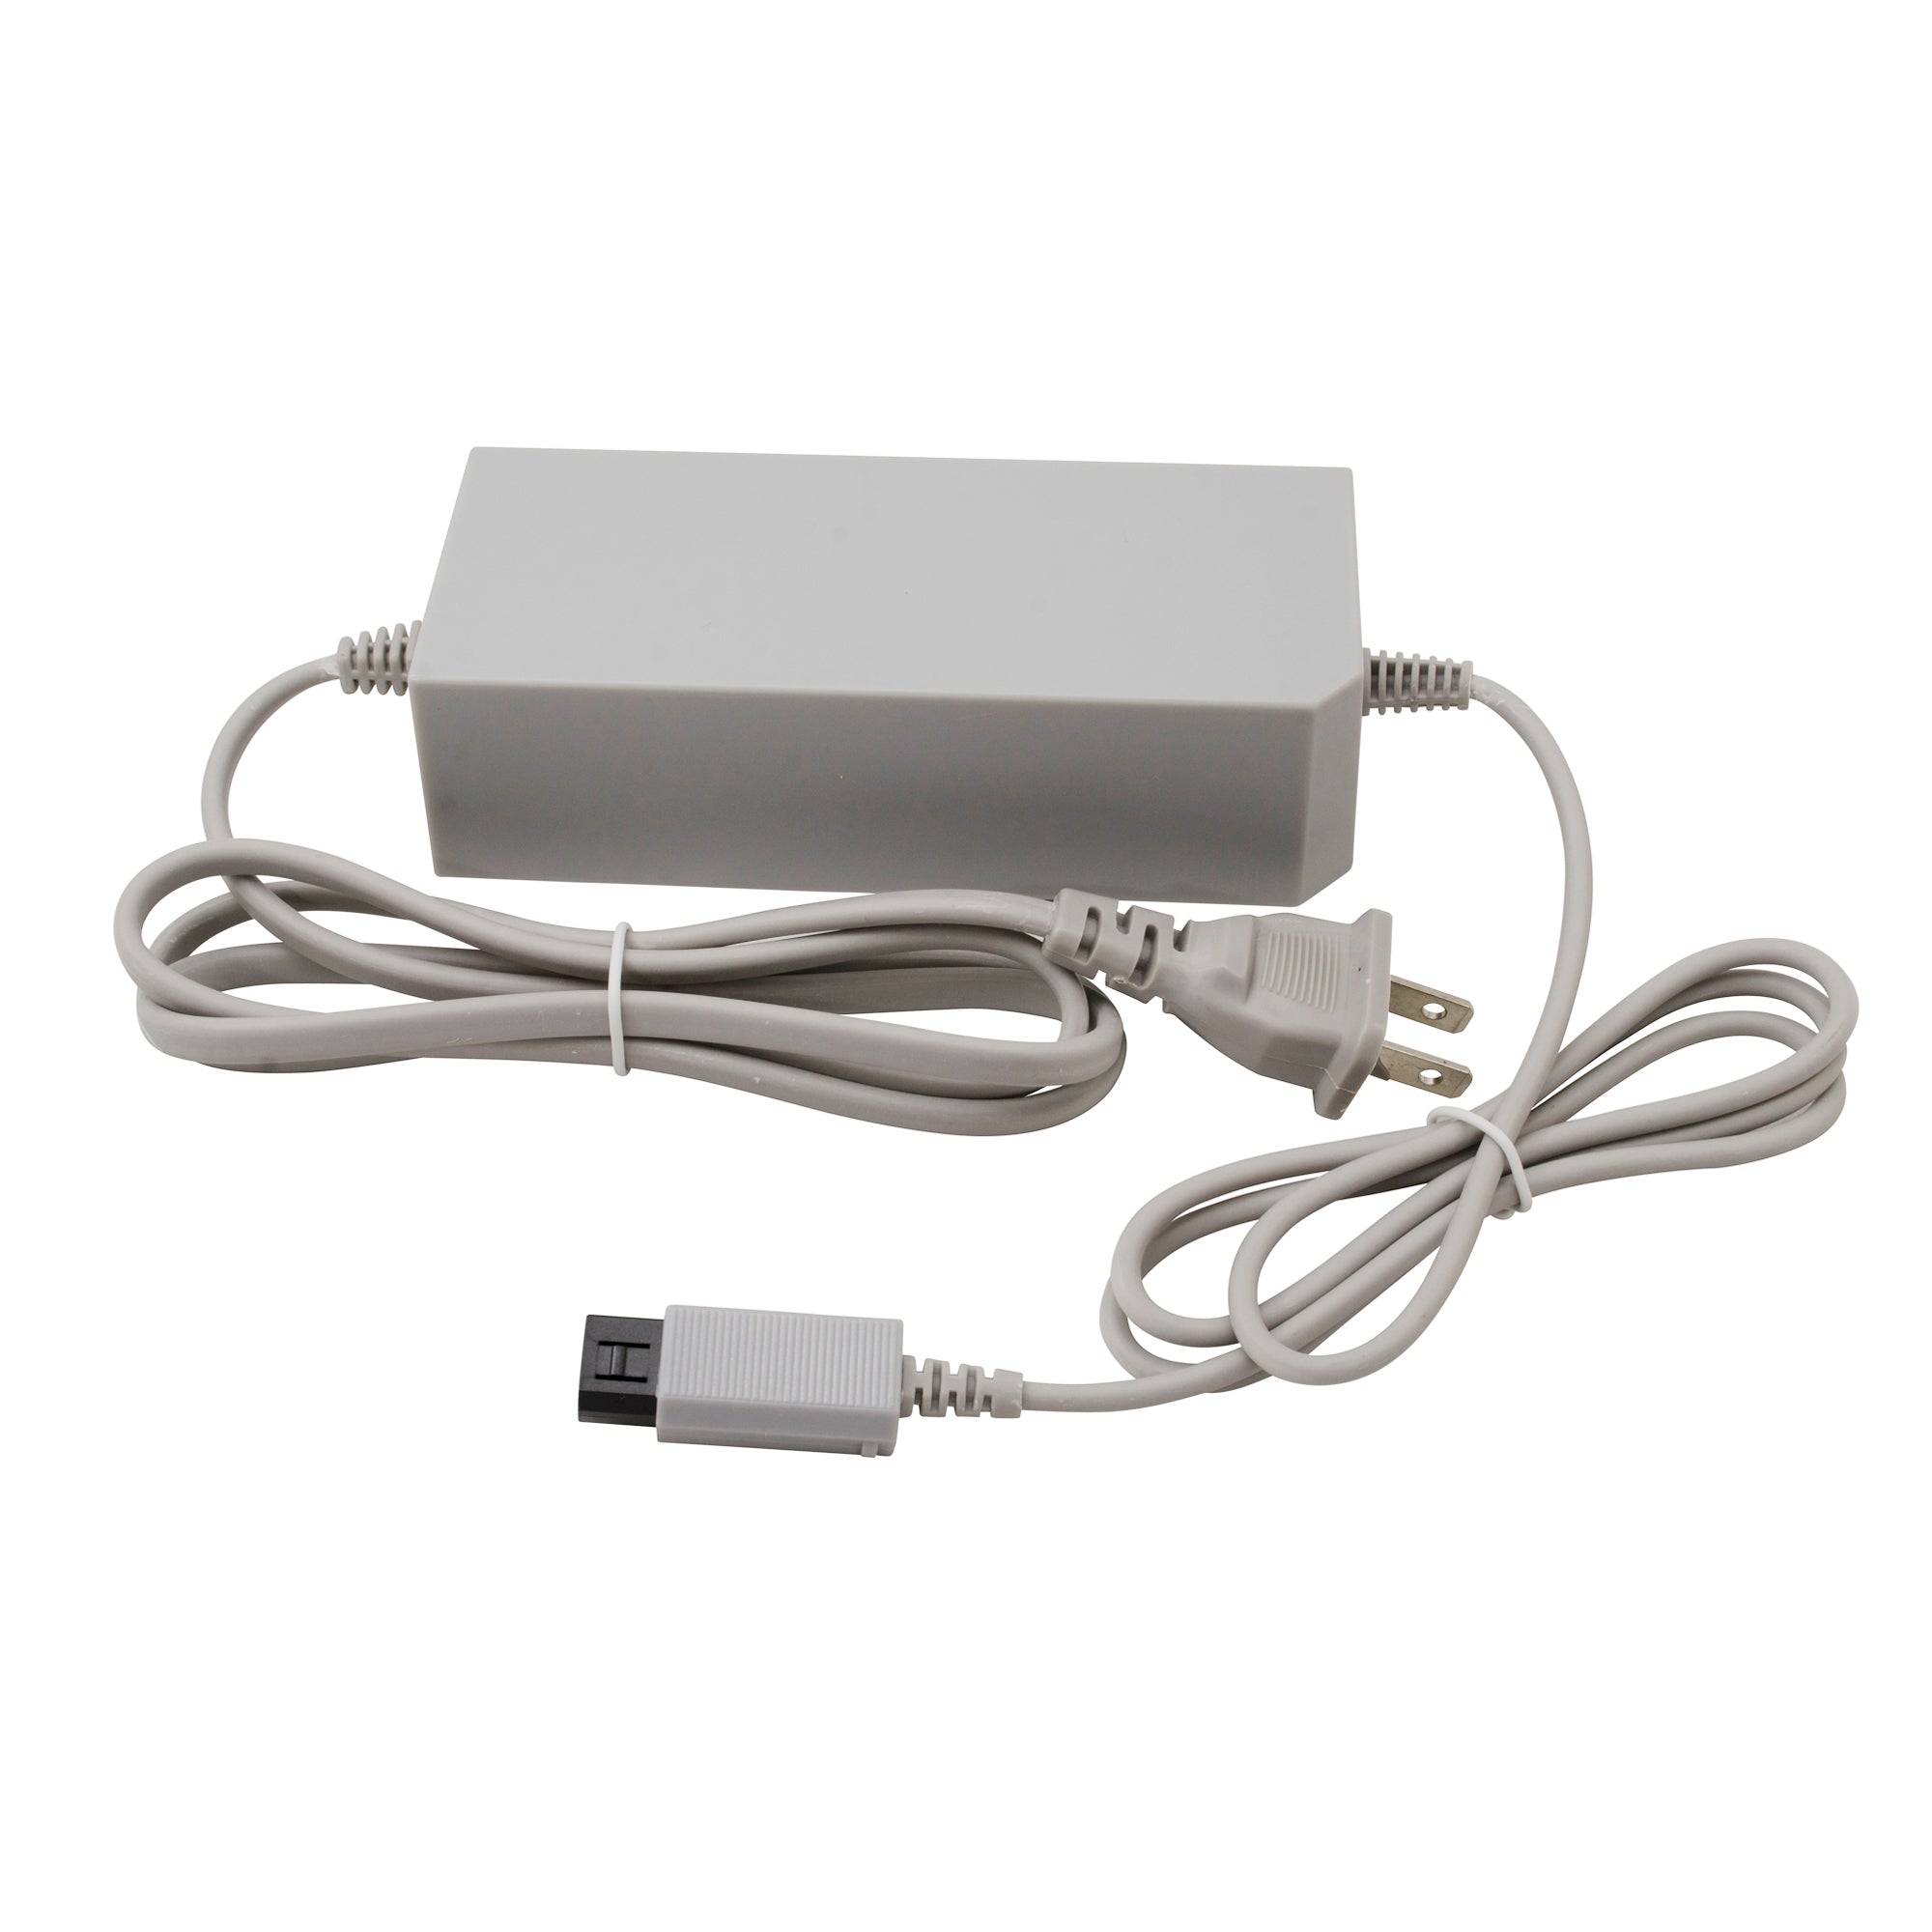 AC Power Supply for Nintendo WIi